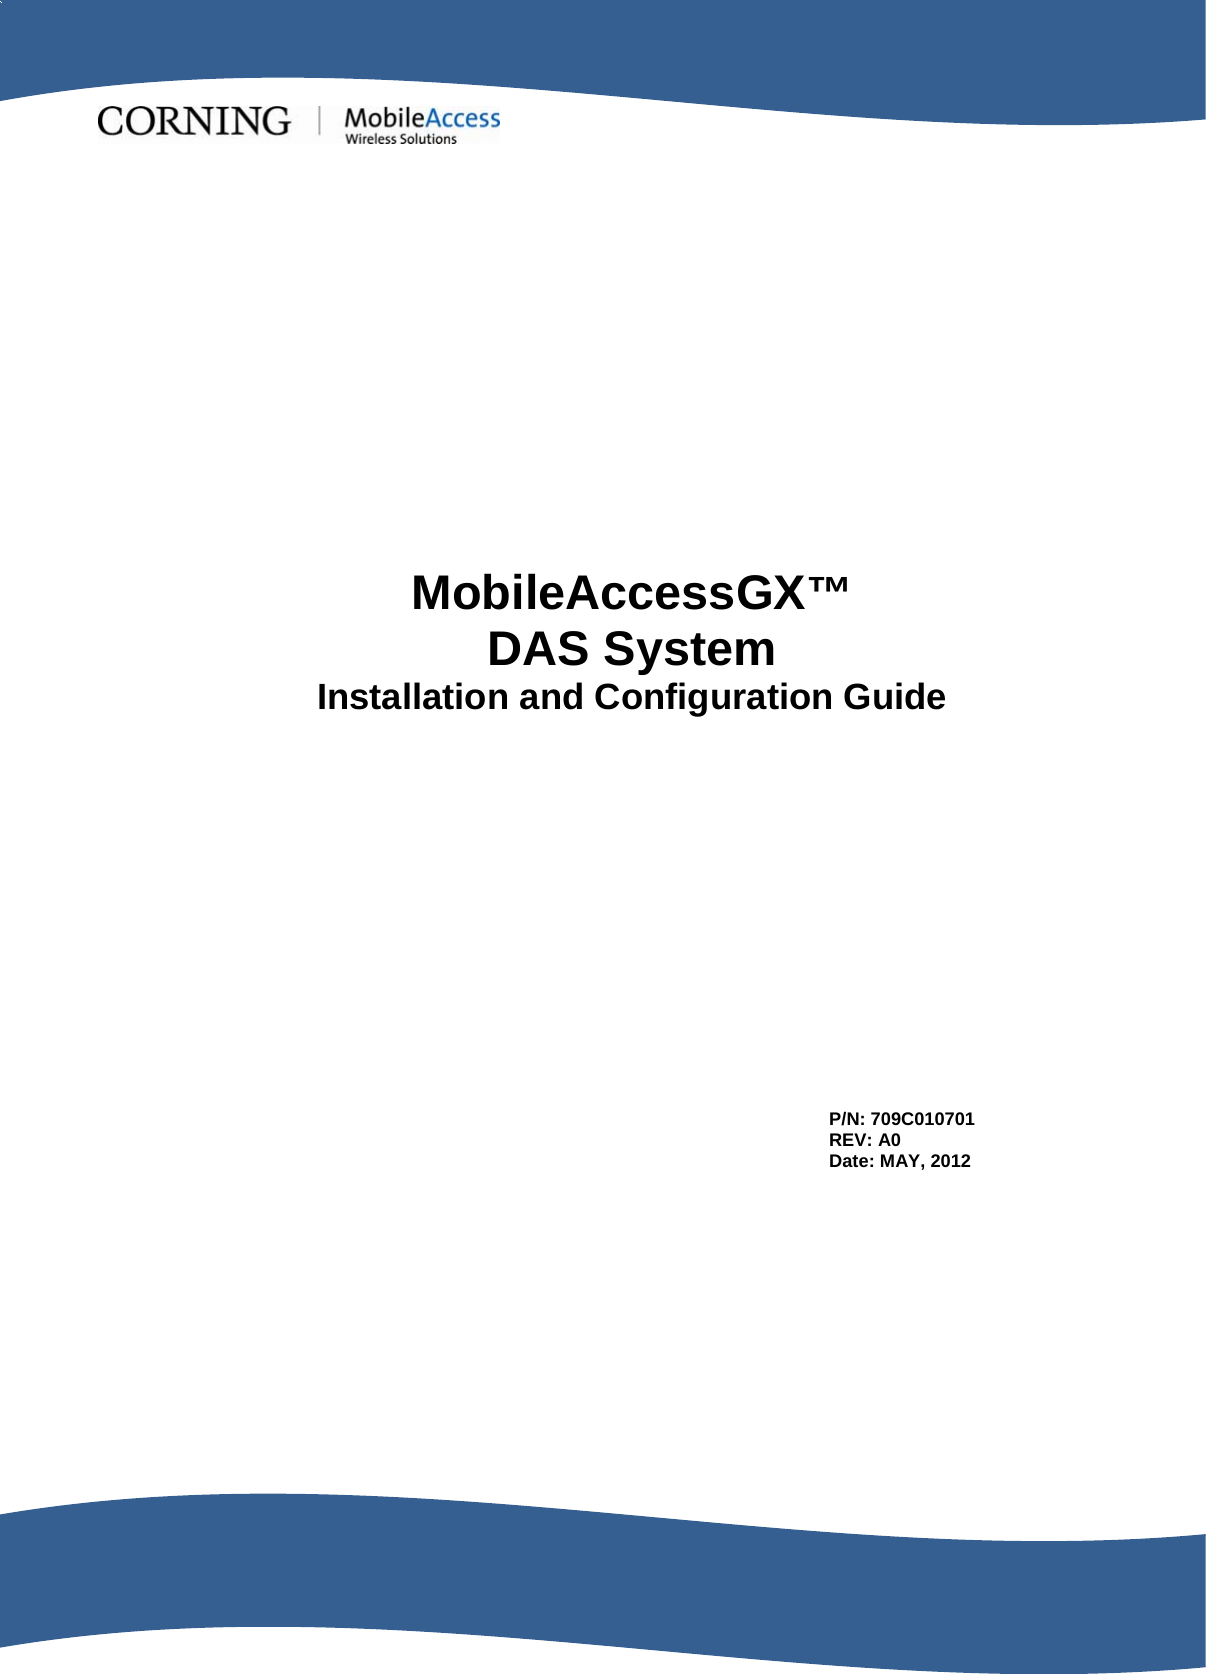                                                 MobileAccessGX™ DAS System Installation and Configuration Guide P/N: 709C010701 REV: A0 Date: MAY, 2012 